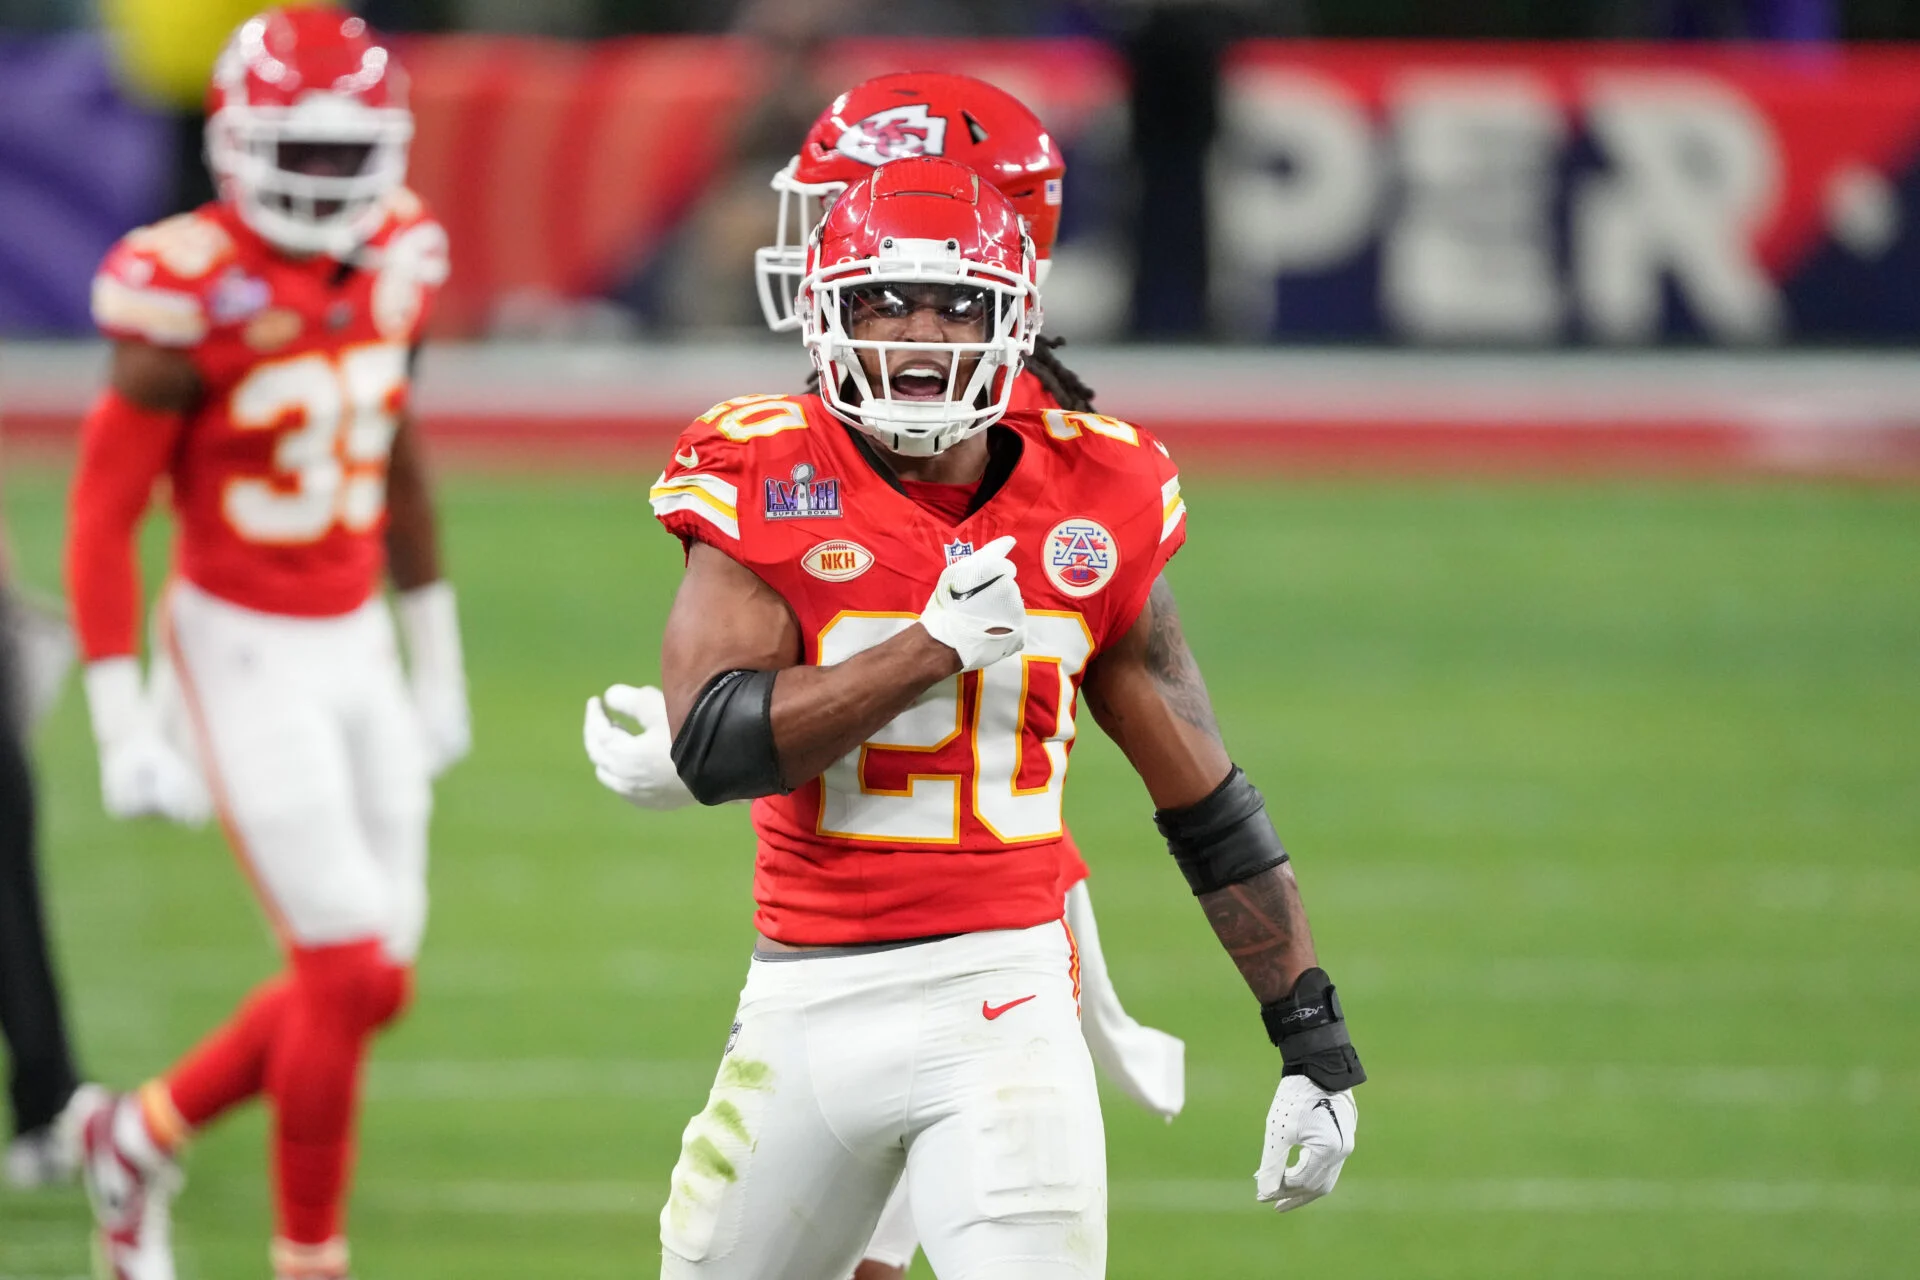 Chiefs' Bold Strategy: Trading Sneed for a Draft Power Play